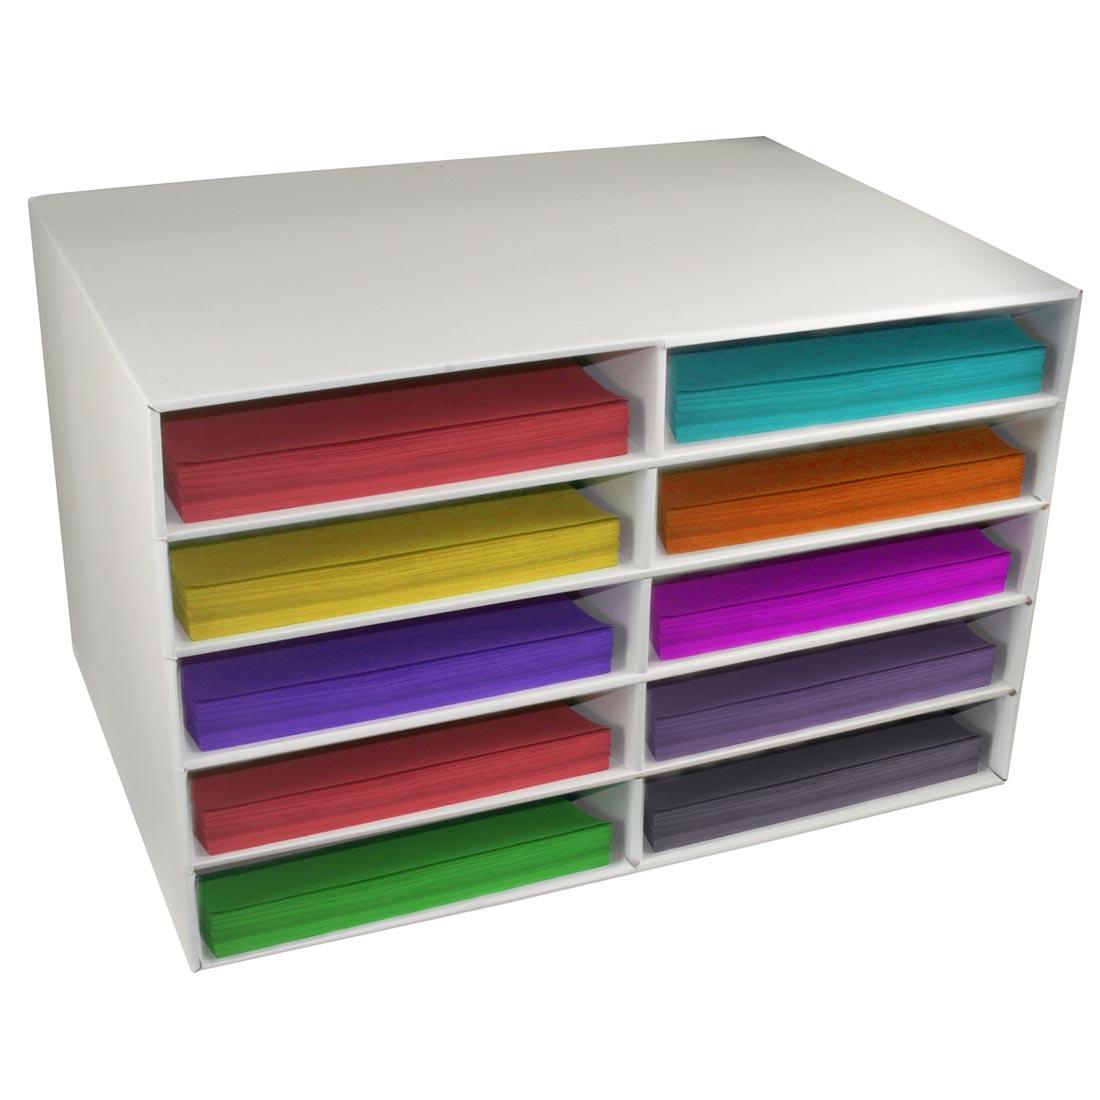 Classroom Keepers 12x18" Construction Paper Storage Box shown holding colorful papers